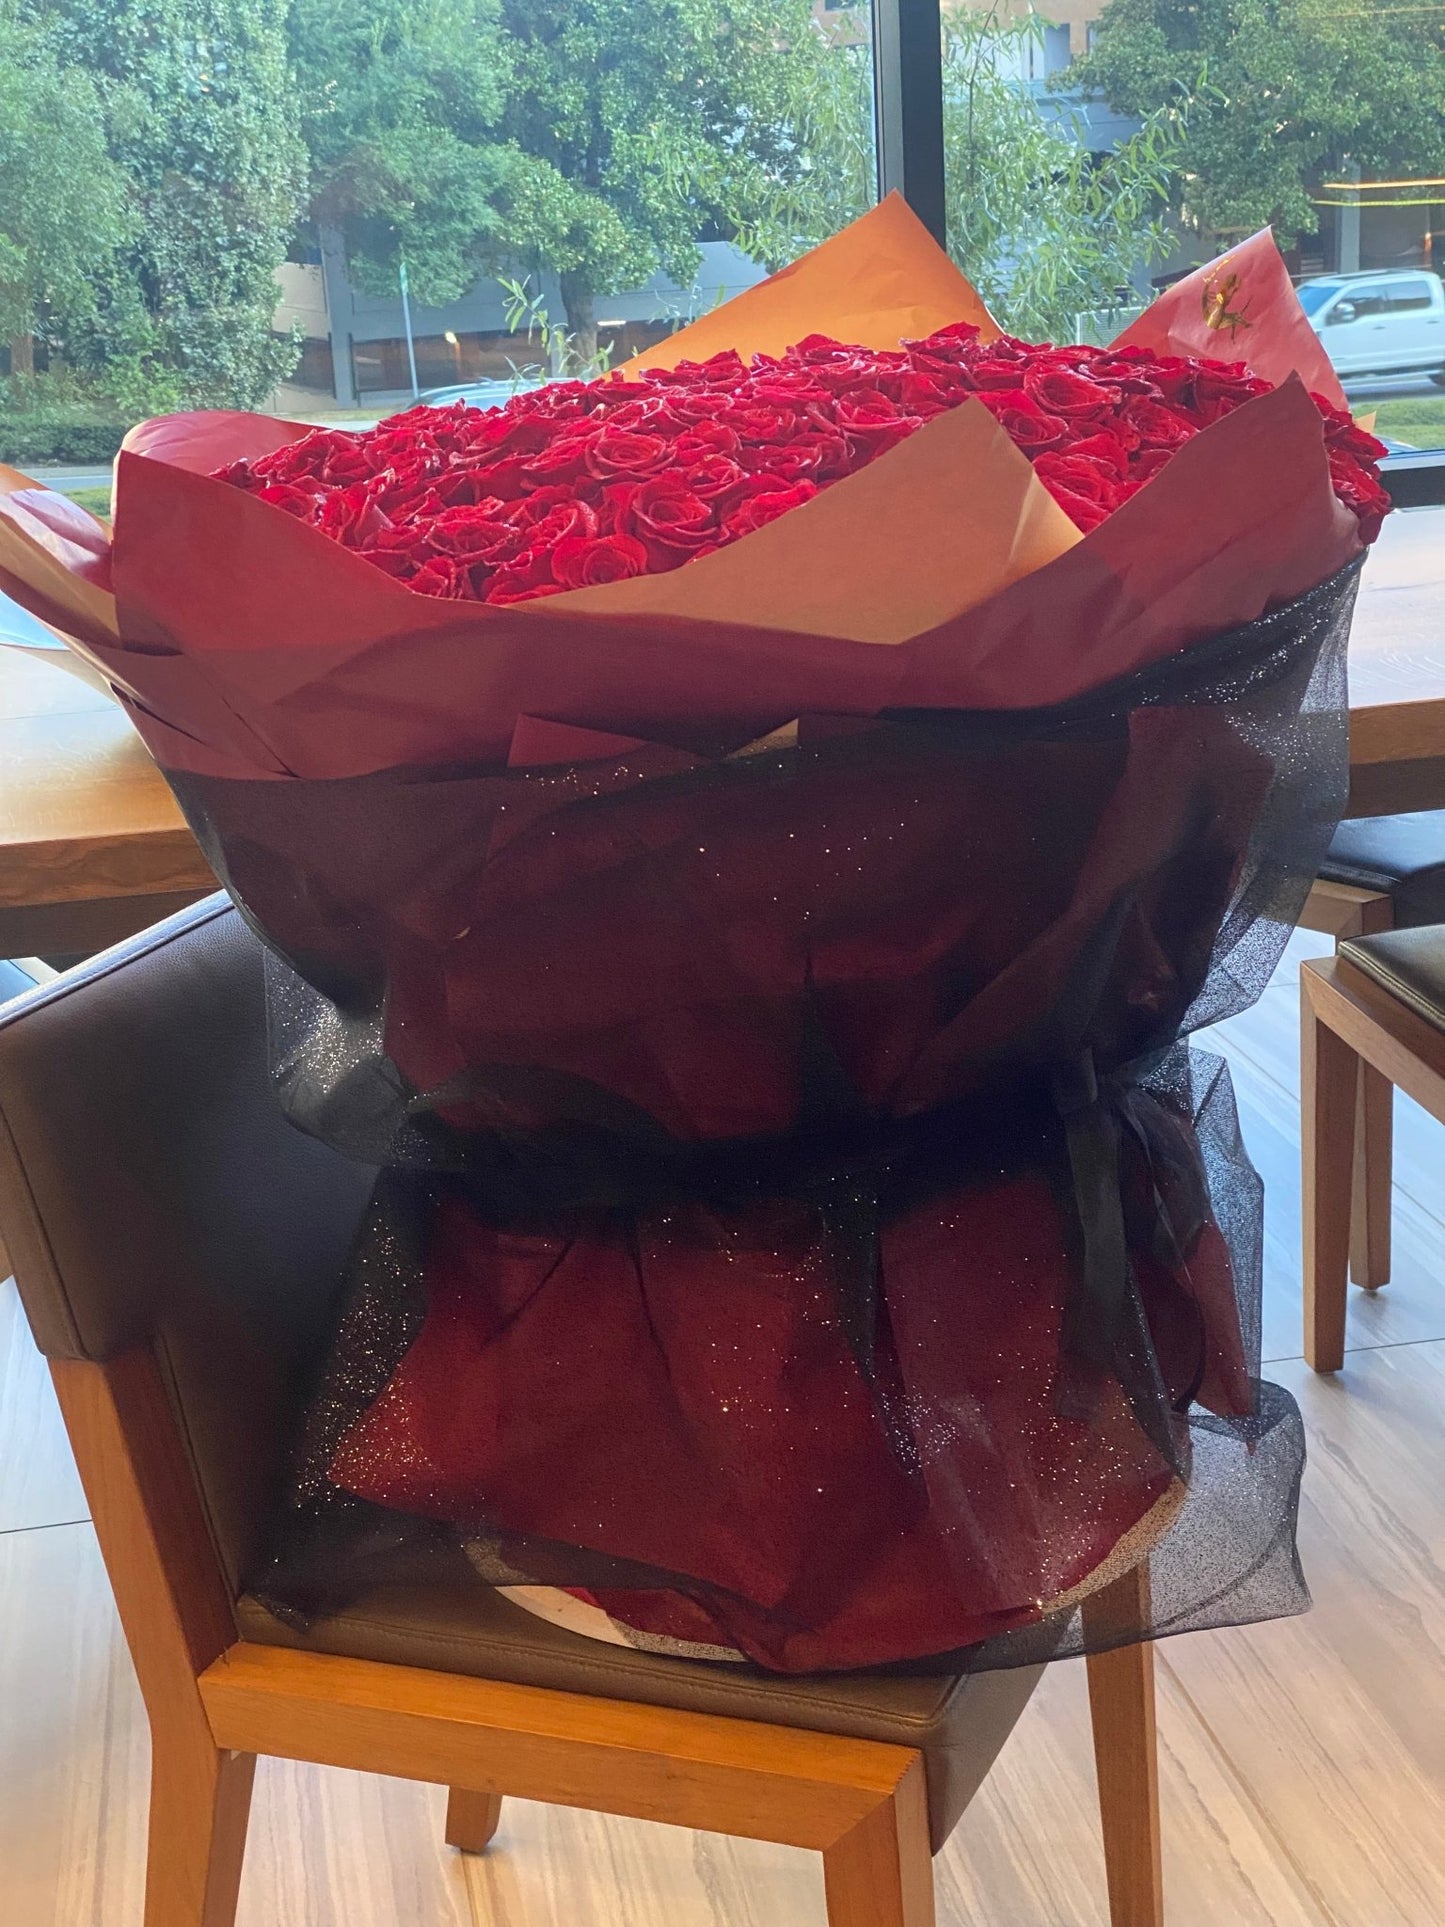 300 ROSES WRAPPED